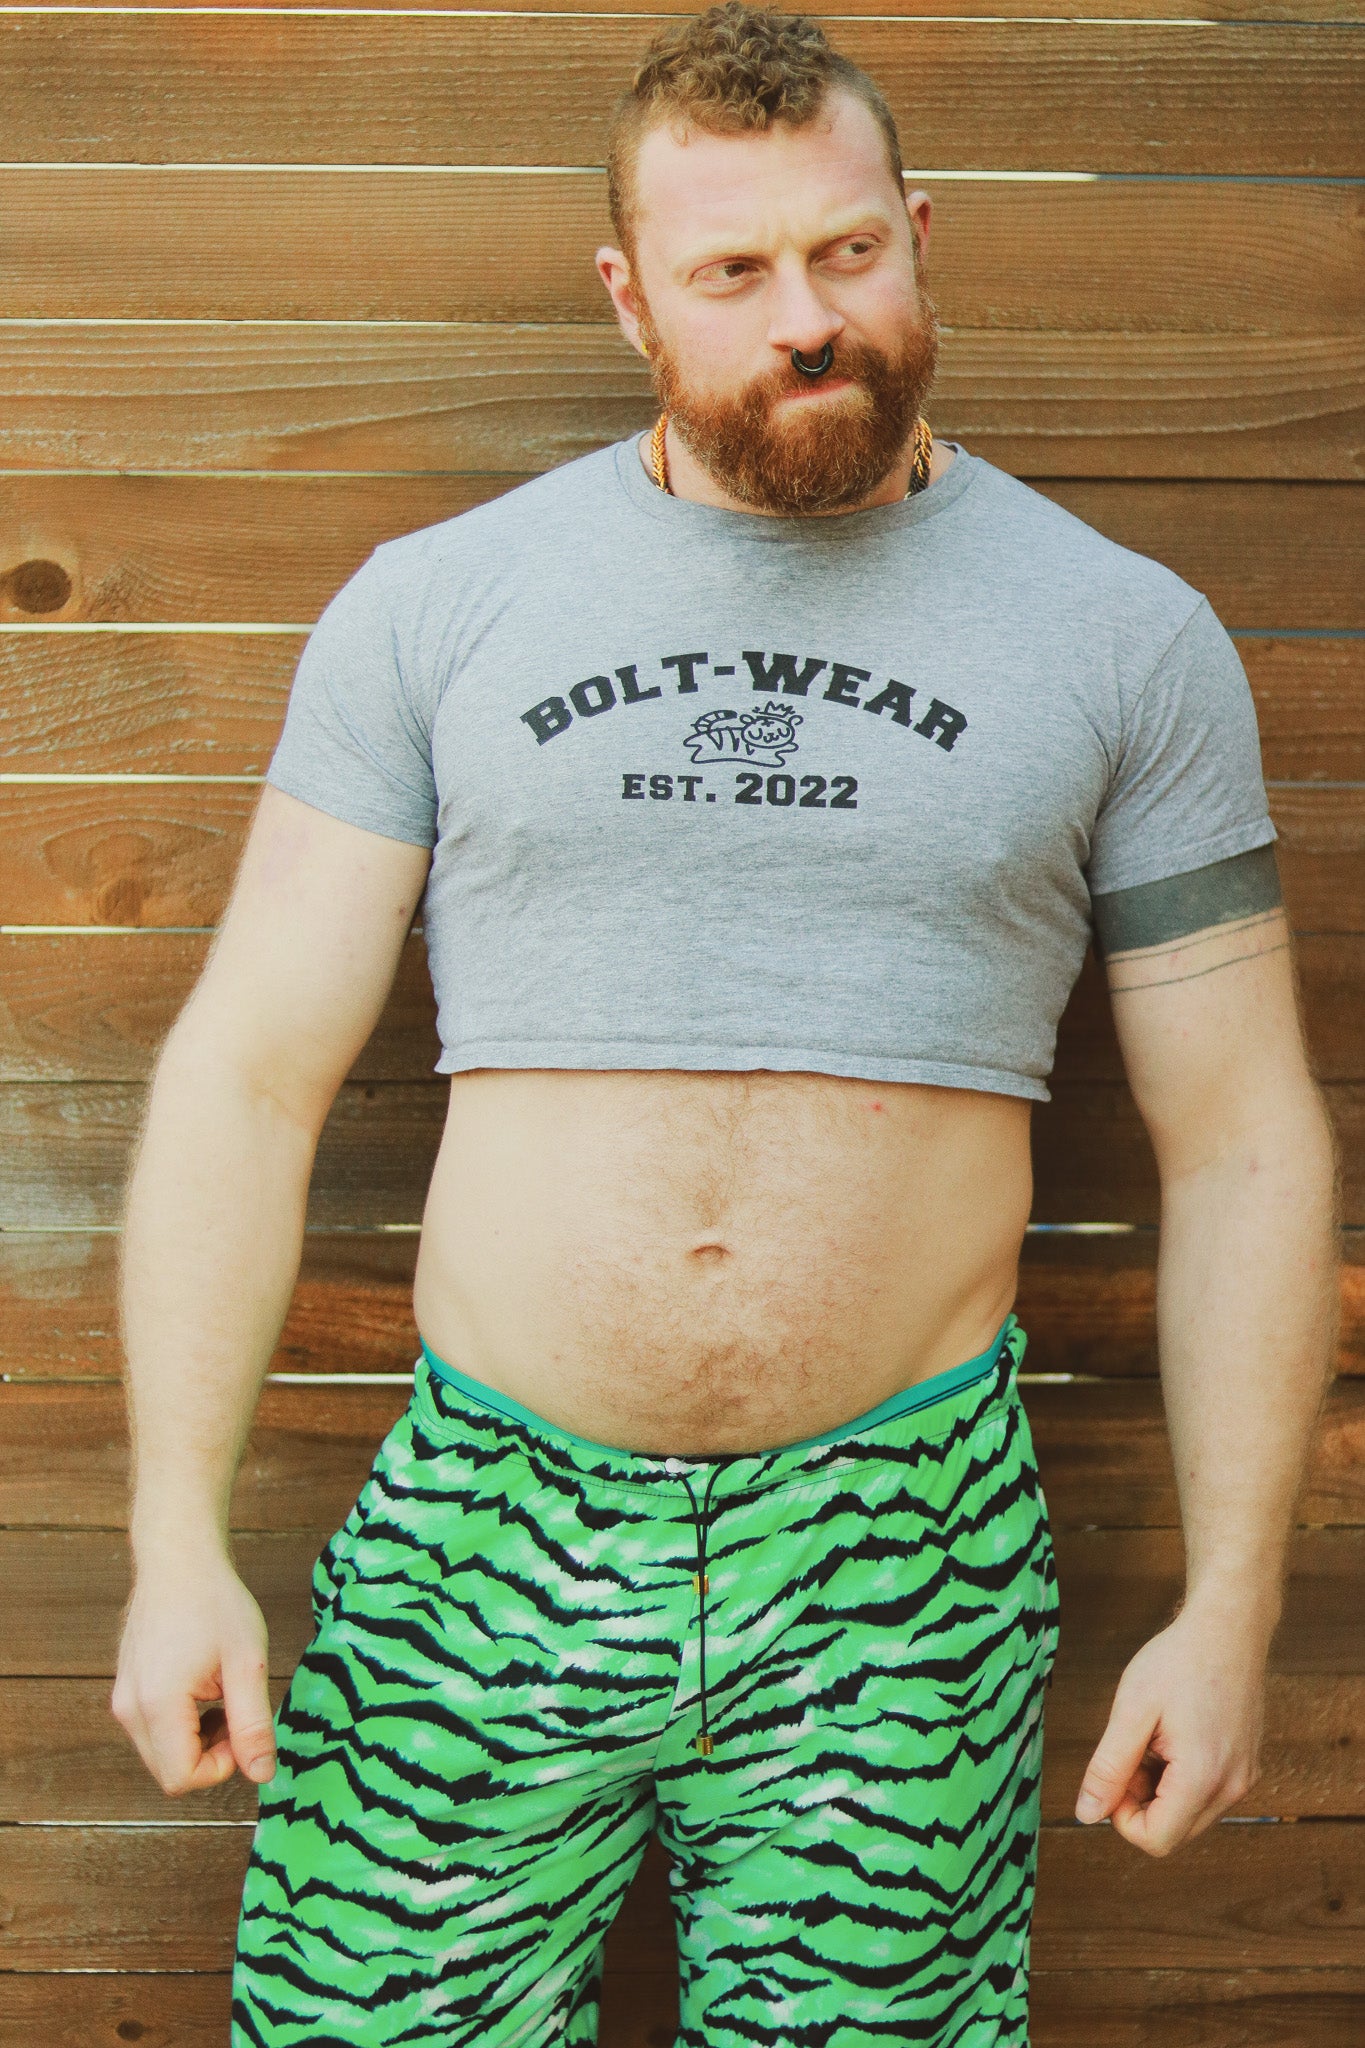 Ginger with beard and piercings standing in front of wooden wall wearing grey heather crop top reading Bolt-wear Est. 2022 featuring the boltwear logo and green tiger stripped pants